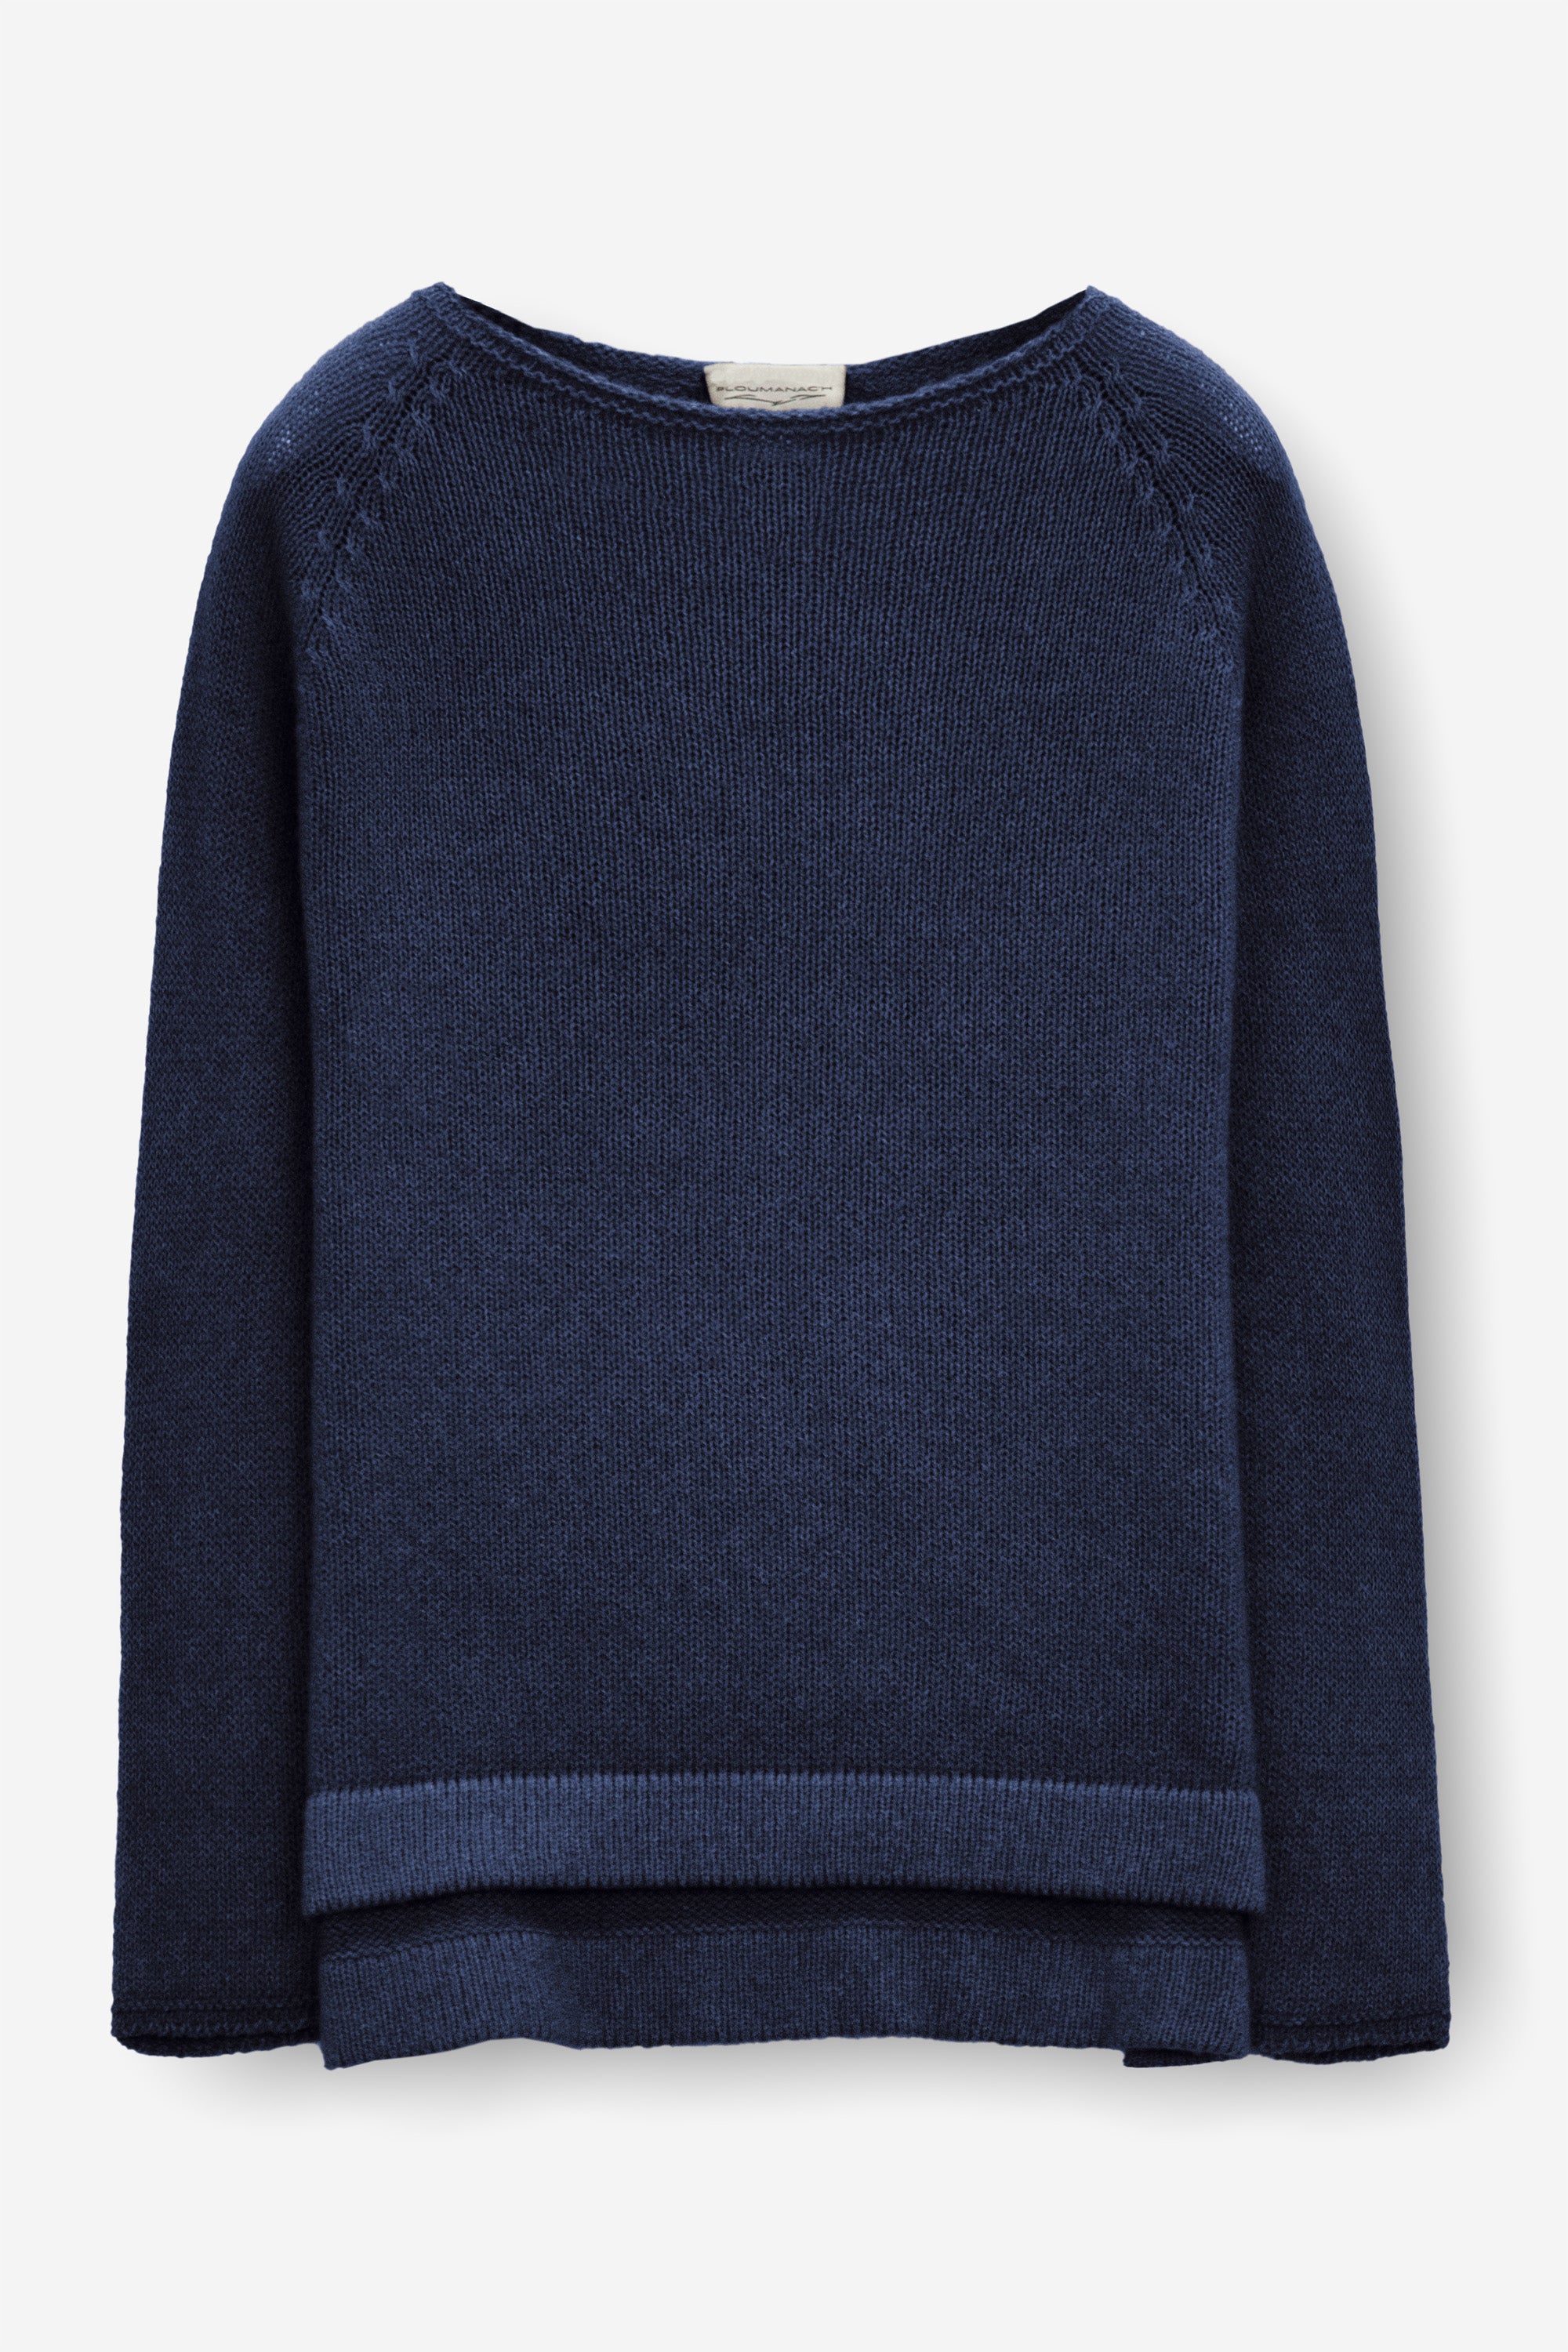 Appin Sweater - Navy